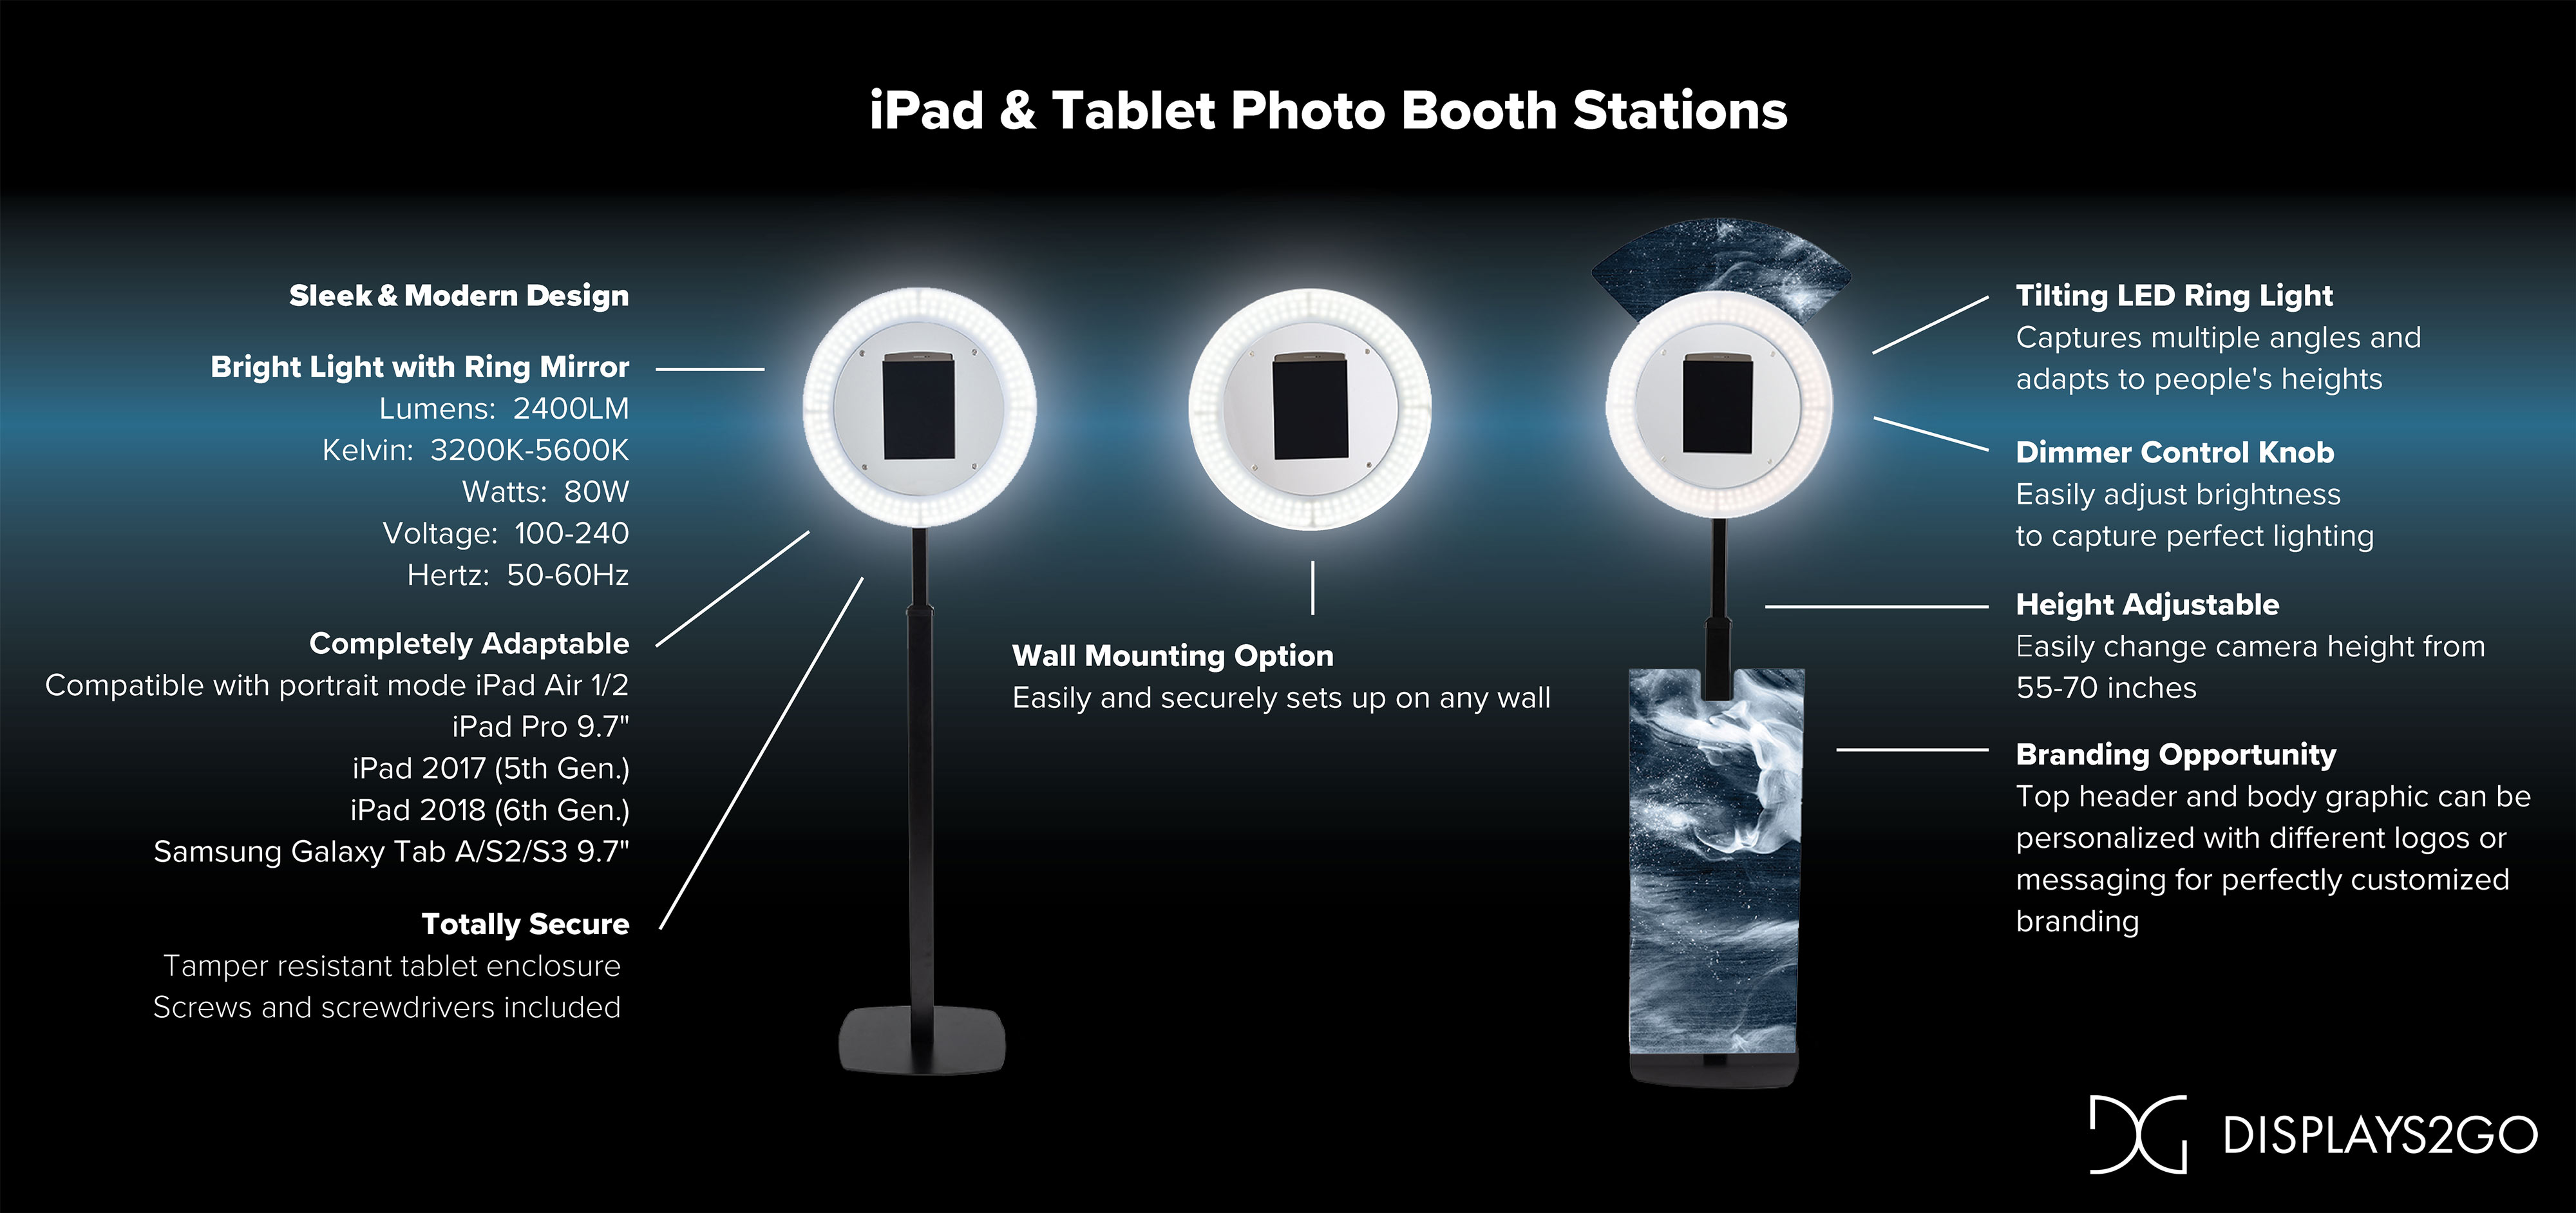 iPad and tablet photo booth features and specifications